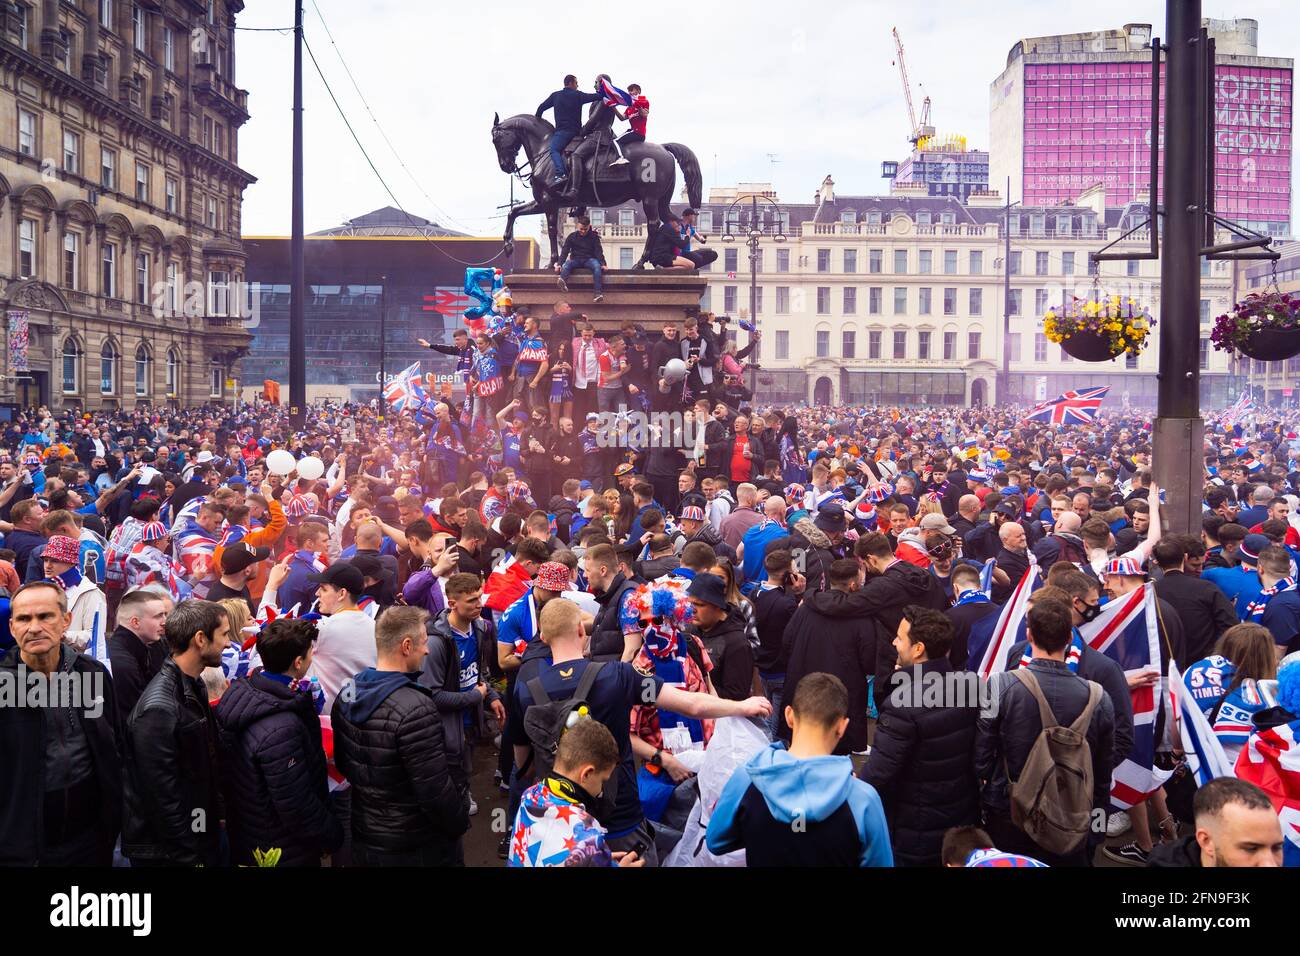 Glasgow, Scotland, UK. 15 May 2021. Thousands of supporters and fans of Rangers football club descend into George Square in Glasgow to celebrate winning the Scottish Premiership championship for the 55th time and the first time for 10 years.Iain Masterton/Alamy Live News Stock Photo